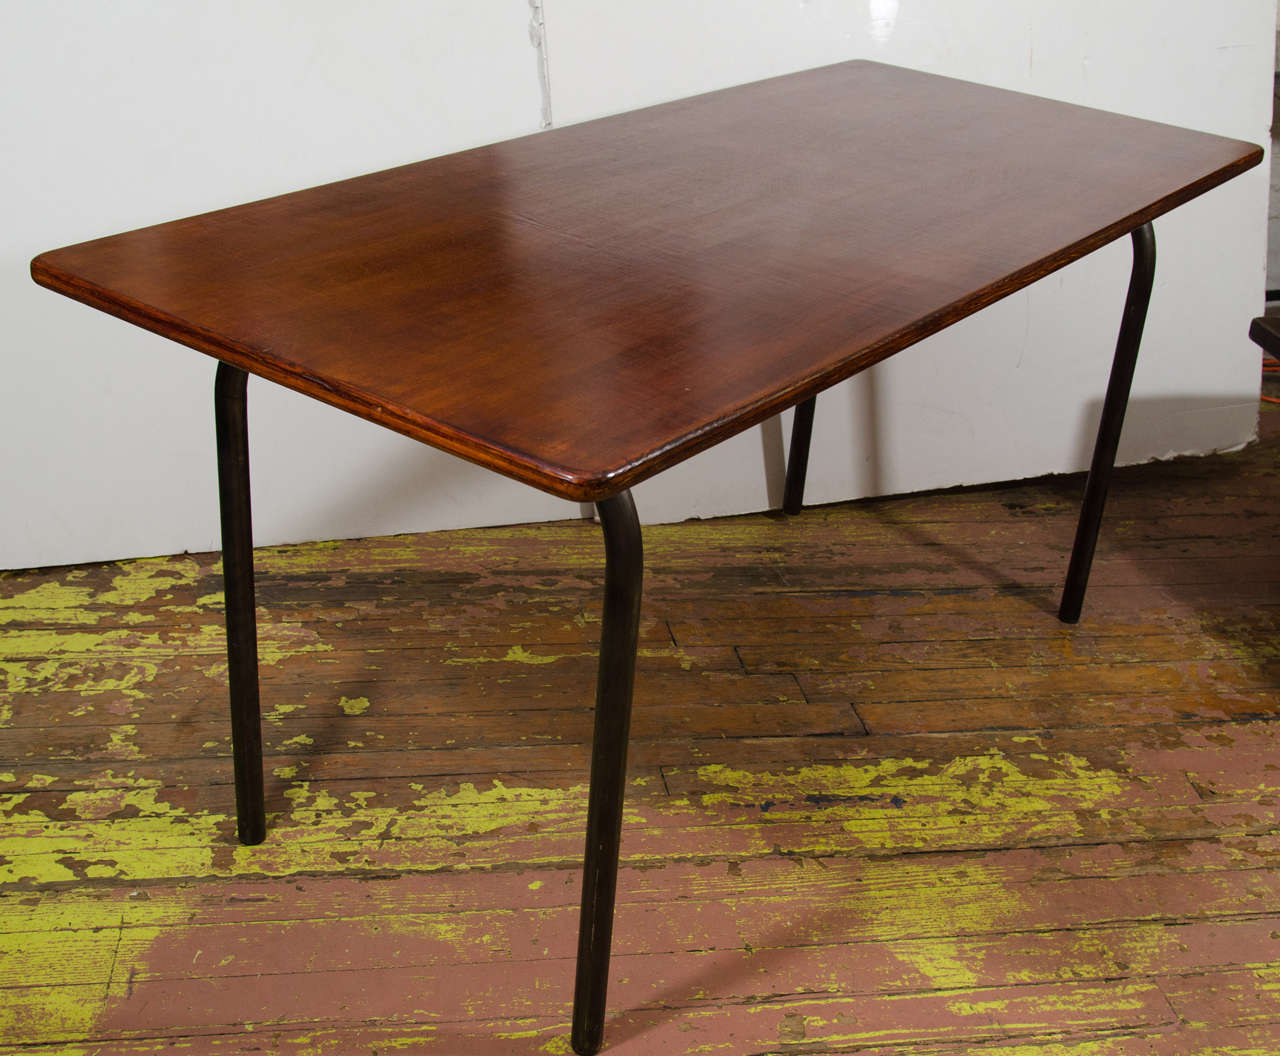 Wooden French schoolhouse table with metal, tubular legs, hand rubbed finish.